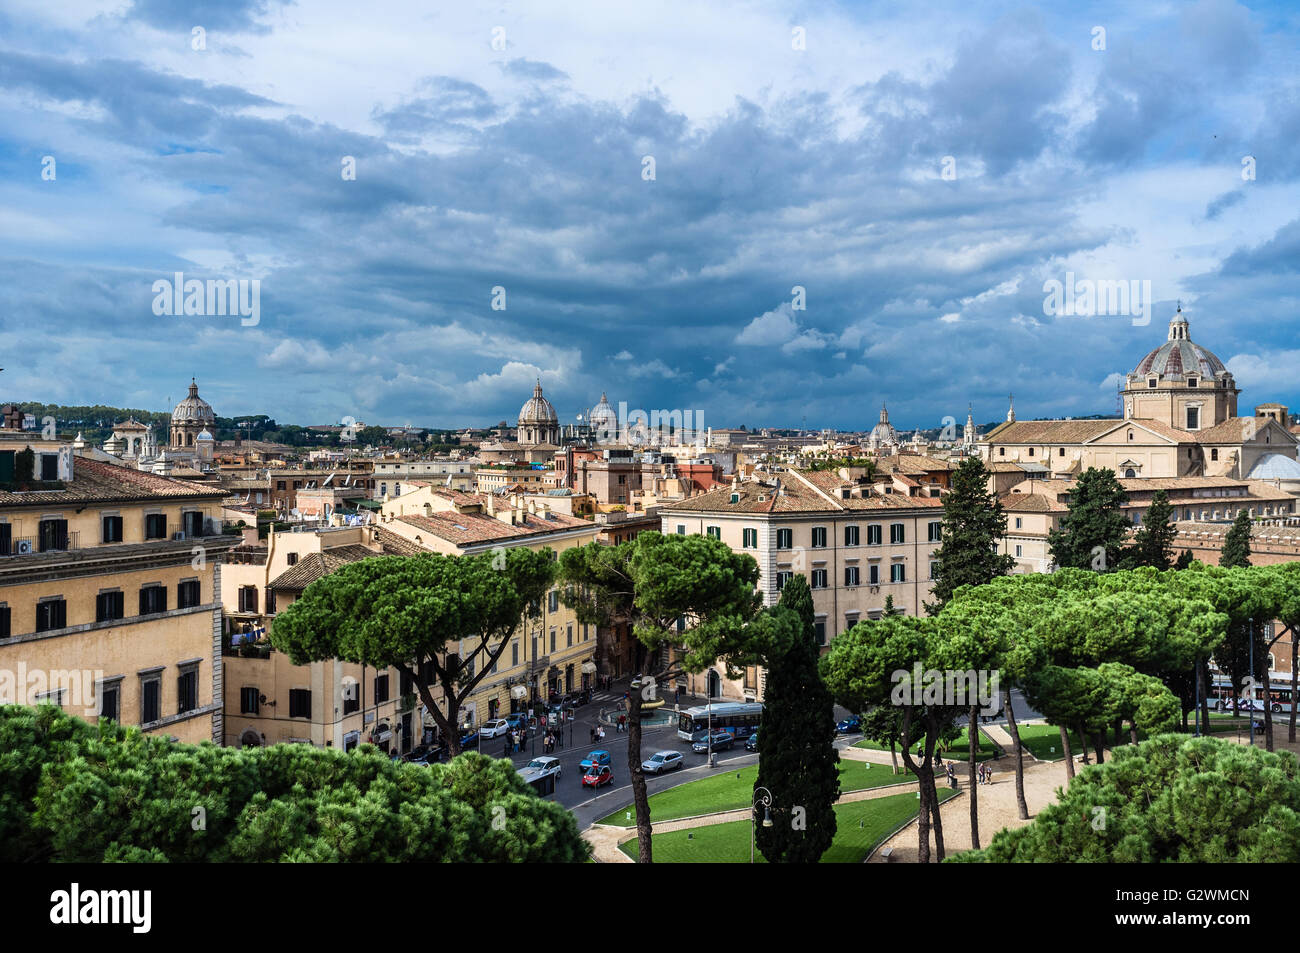 Rome city before thunderstorm, high view Stock Photo